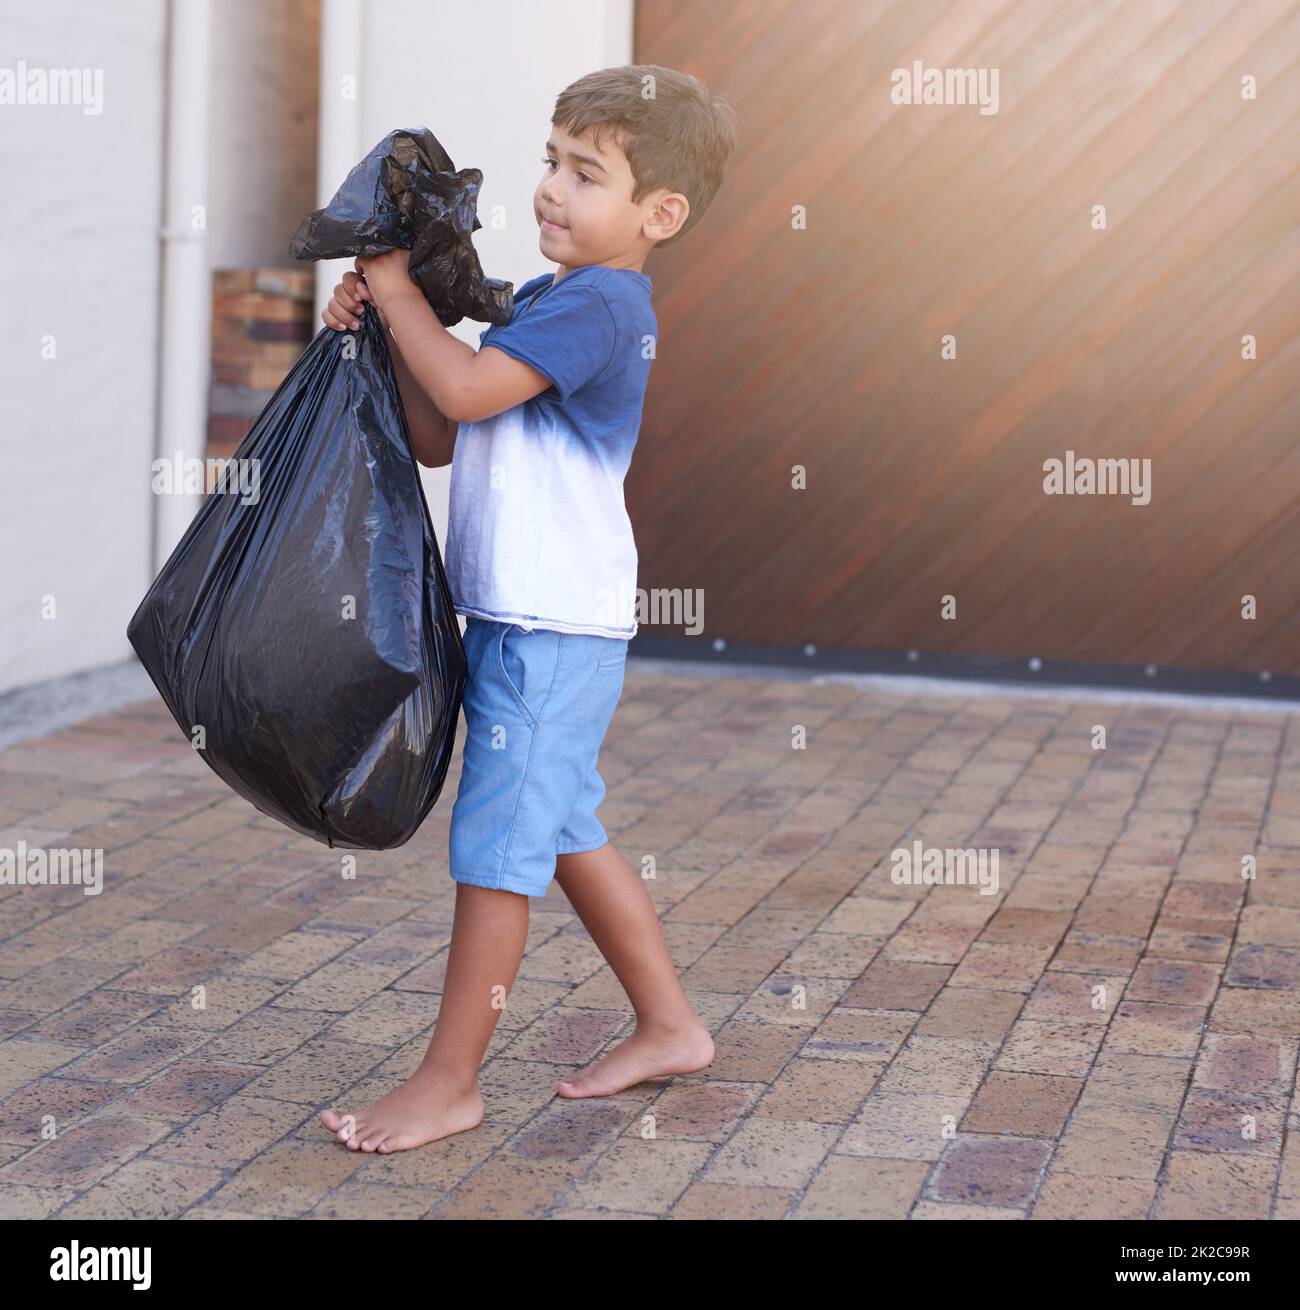 https://c8.alamy.com/comp/2K2C99R/time-to-take-out-the-trash-shot-of-a-little-boy-taking-out-the-trash-at-home-2K2C99R.jpg